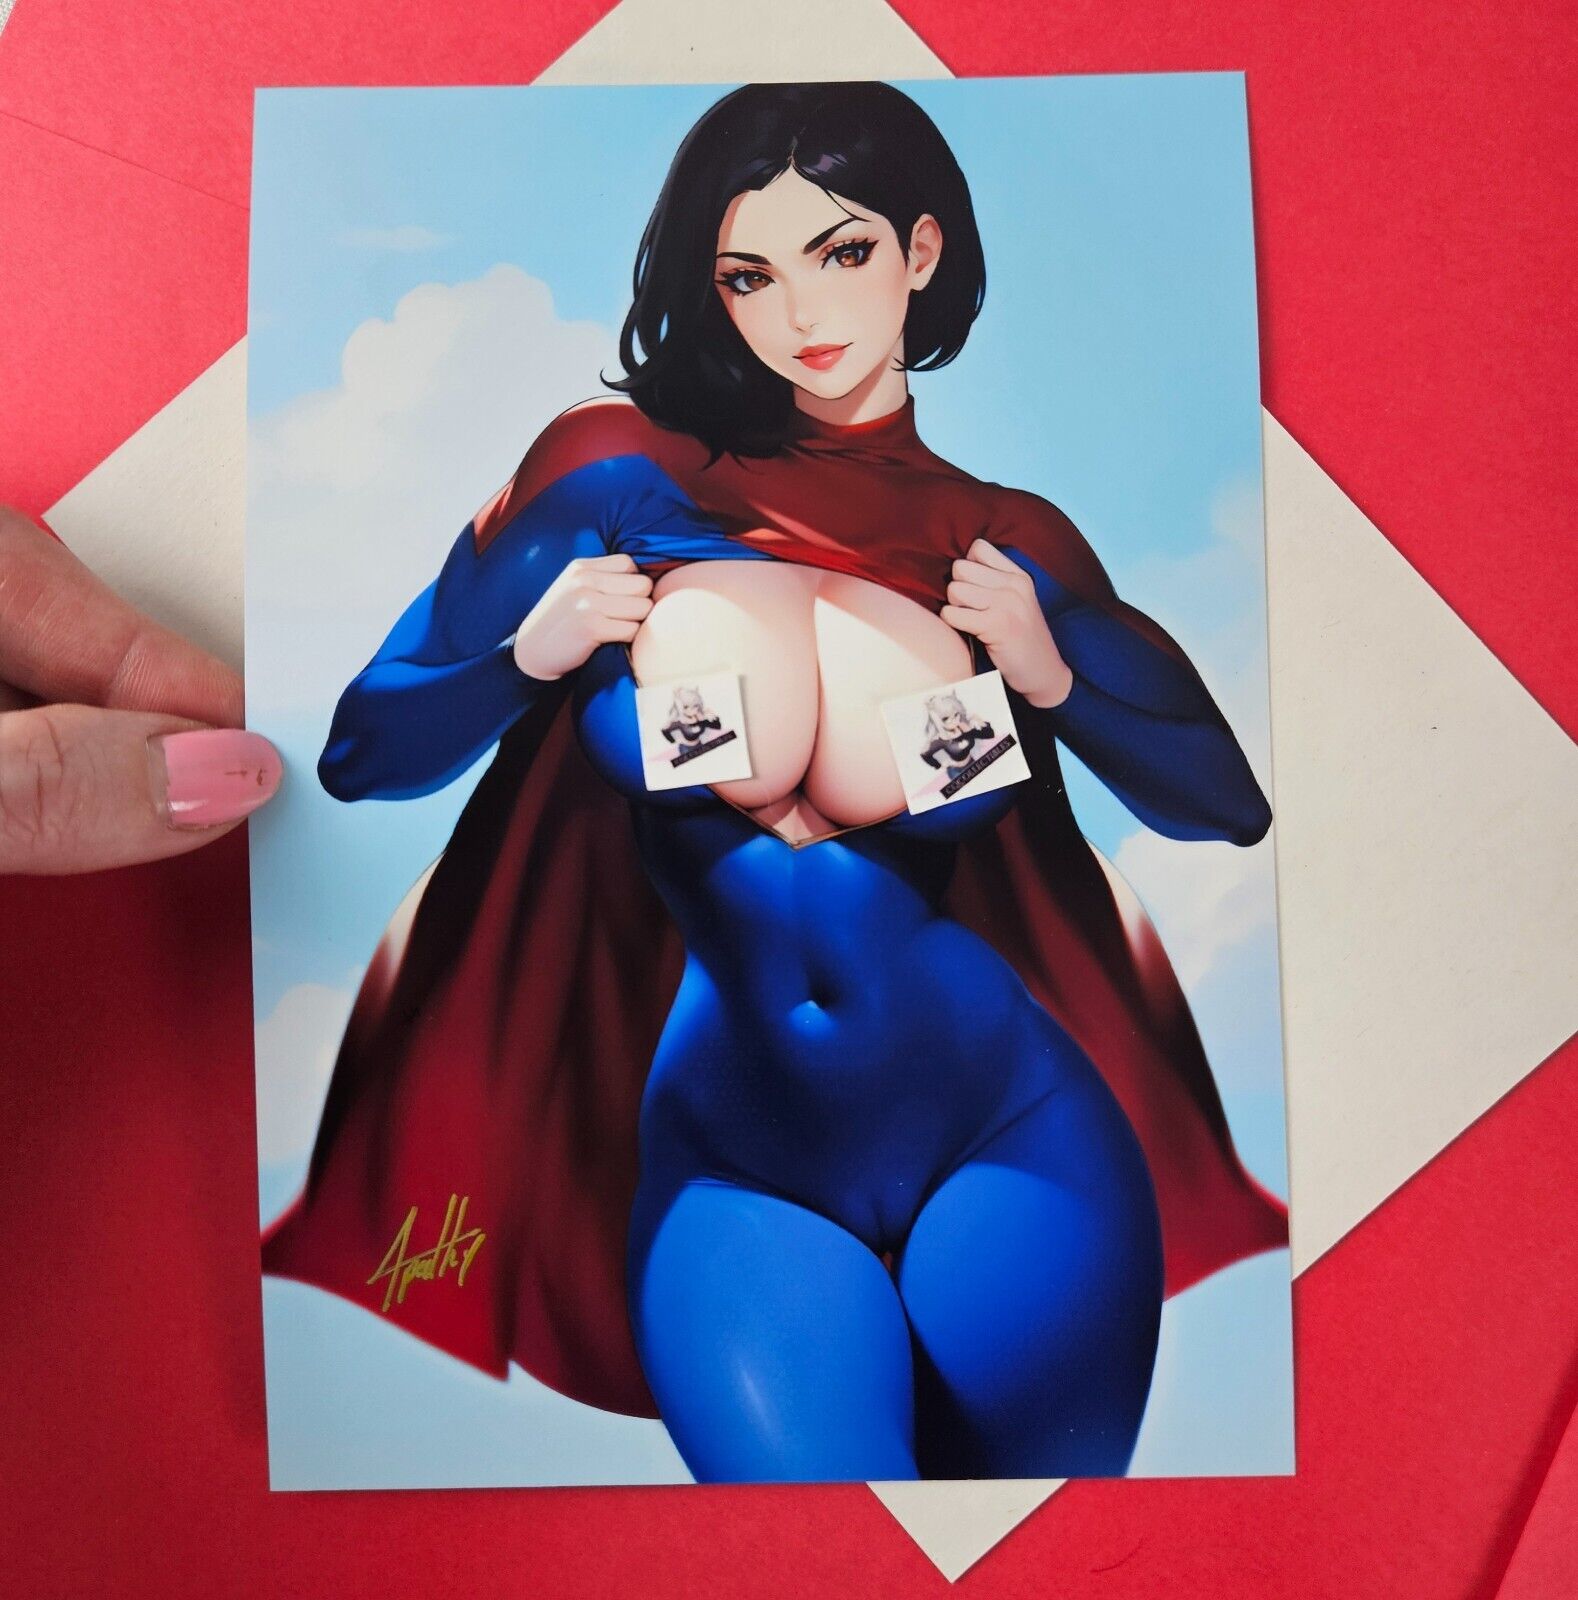 Naughty Supergirl Art Print by Artist of Apathy. Flash Movie Edition. Ships Safe